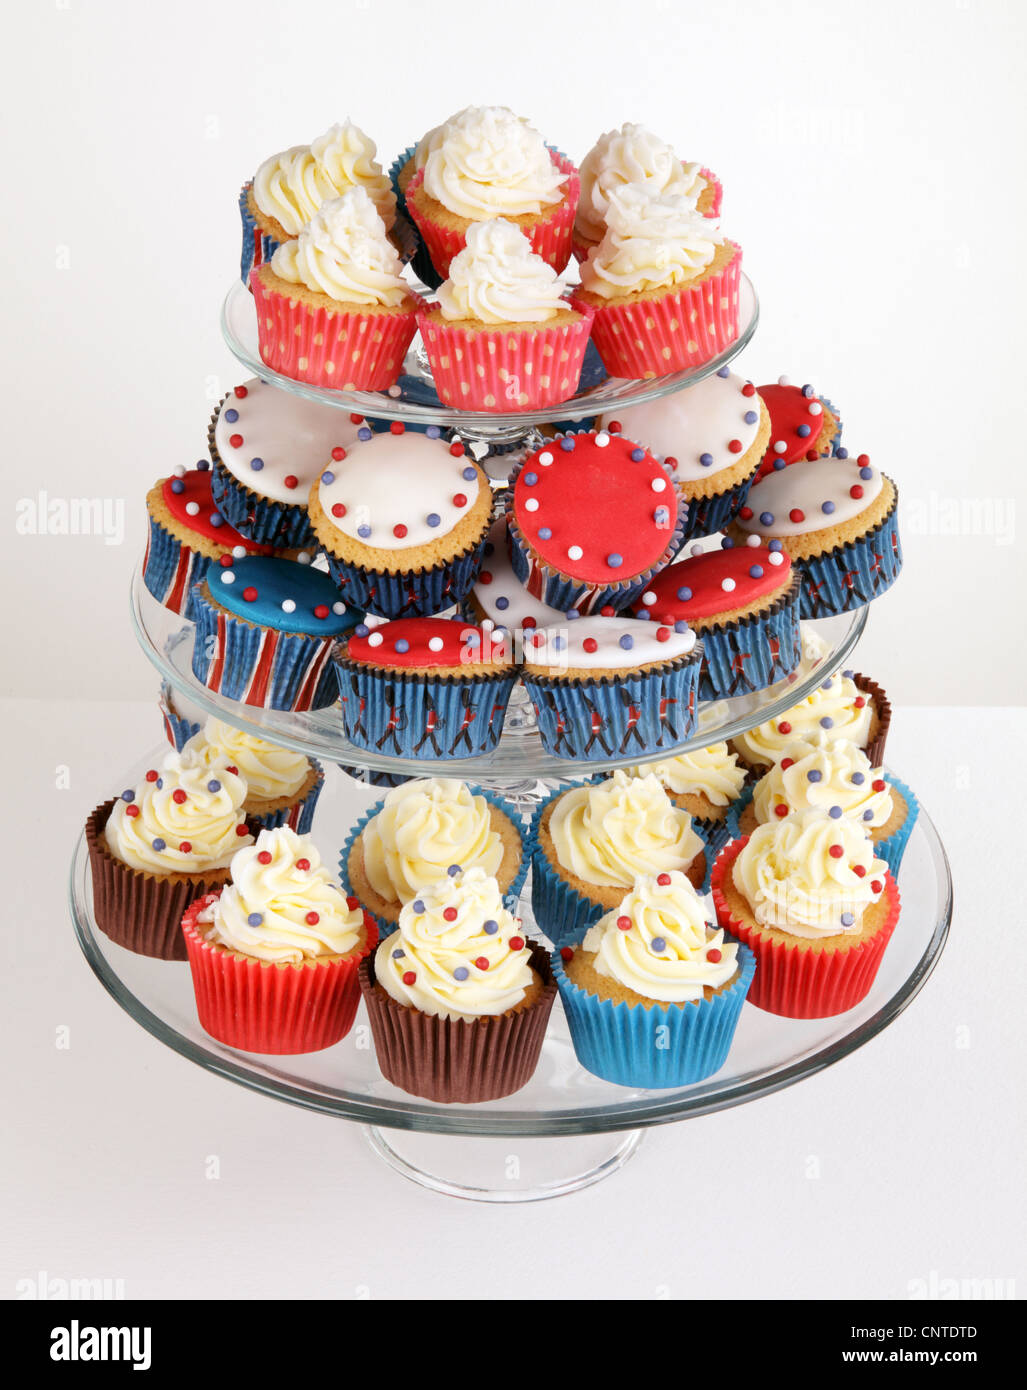 RED,WHITE AND BLUE CUPCAKES ON CAKE STAND Stock Photo